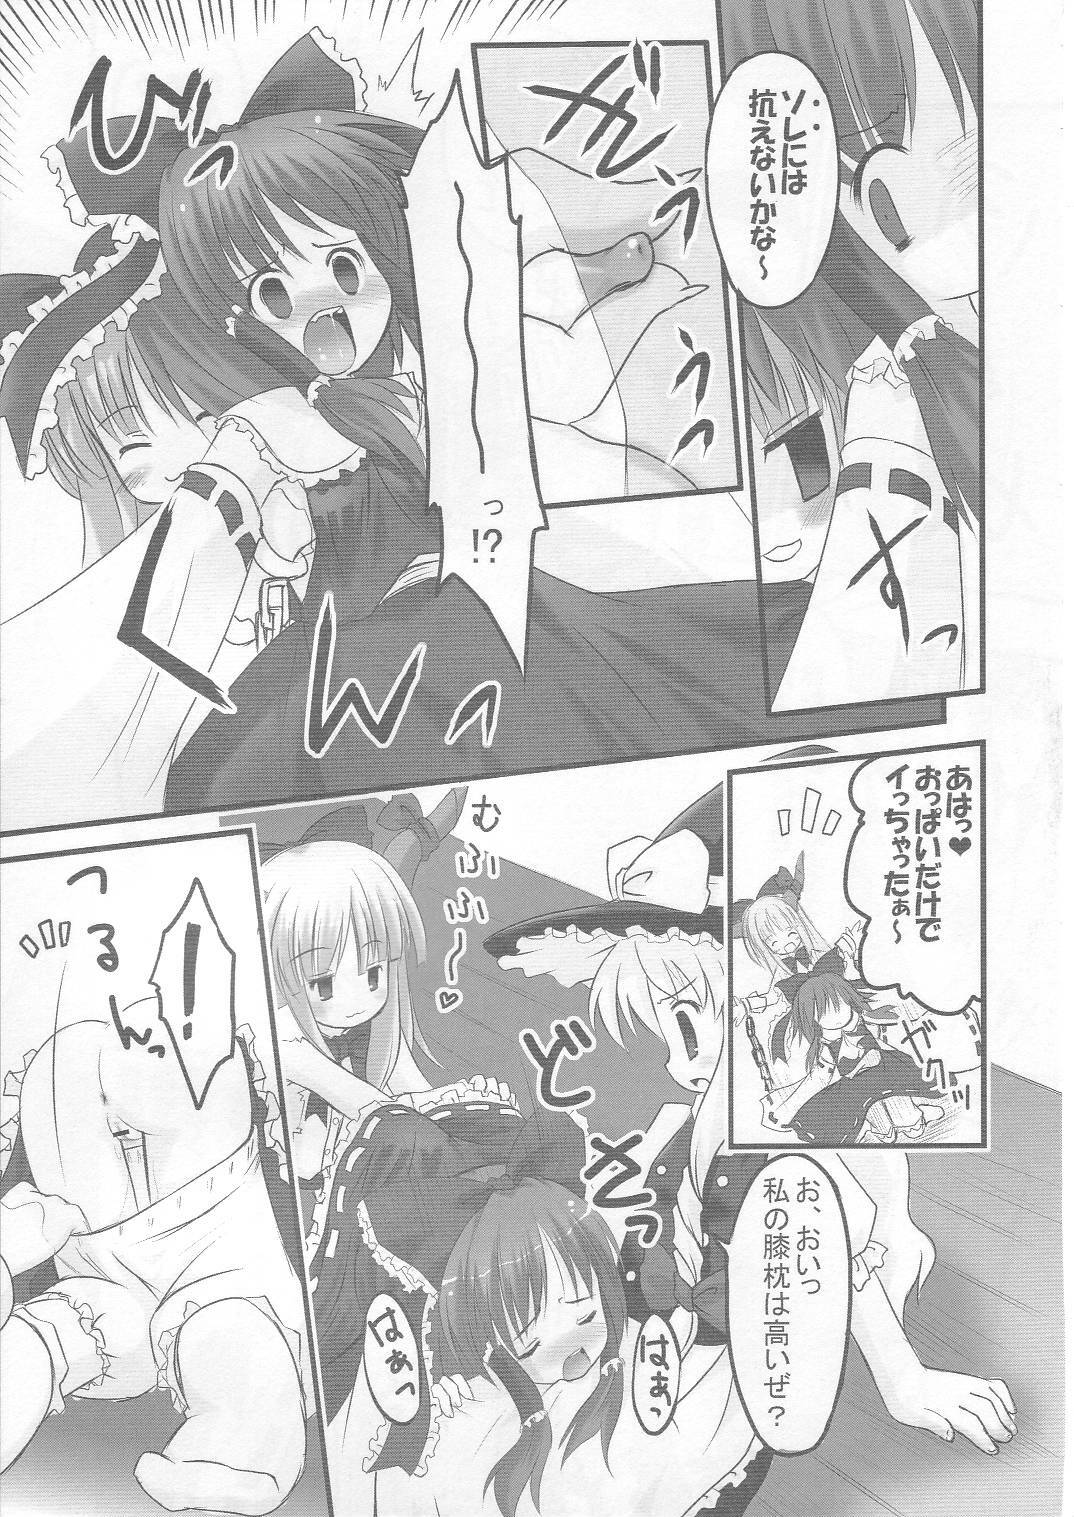 (SC30) [HappyBirthday (Maruchan., Monchy)] REDEMPTION (Touhou Project) page 24 full